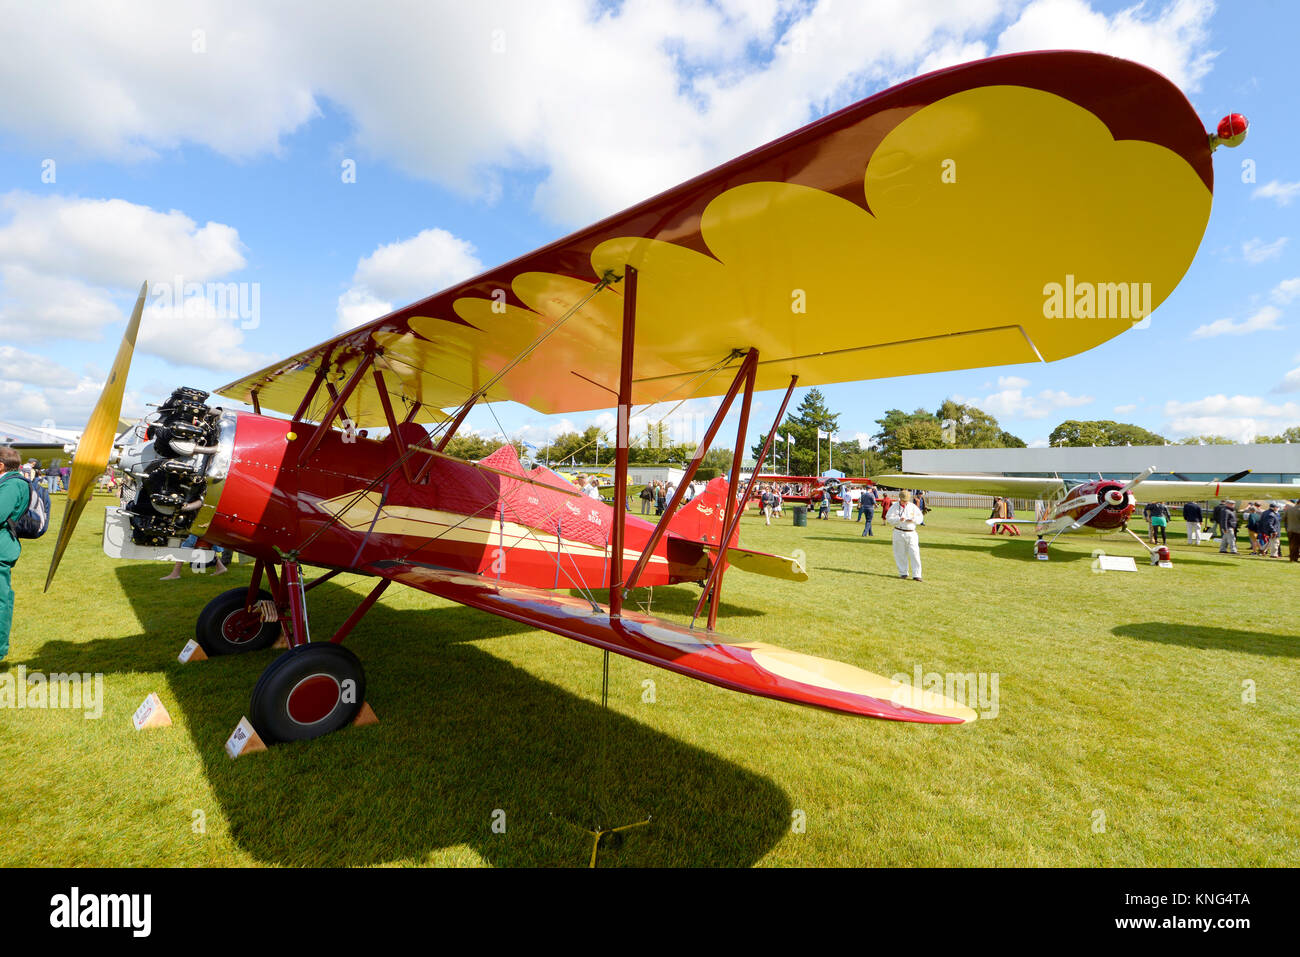 Curtiss Wright Travel Air 4000 plane NC9048 in the Freddie March Spirit of Aviation Goodwood Revival 2017 Stock Photo